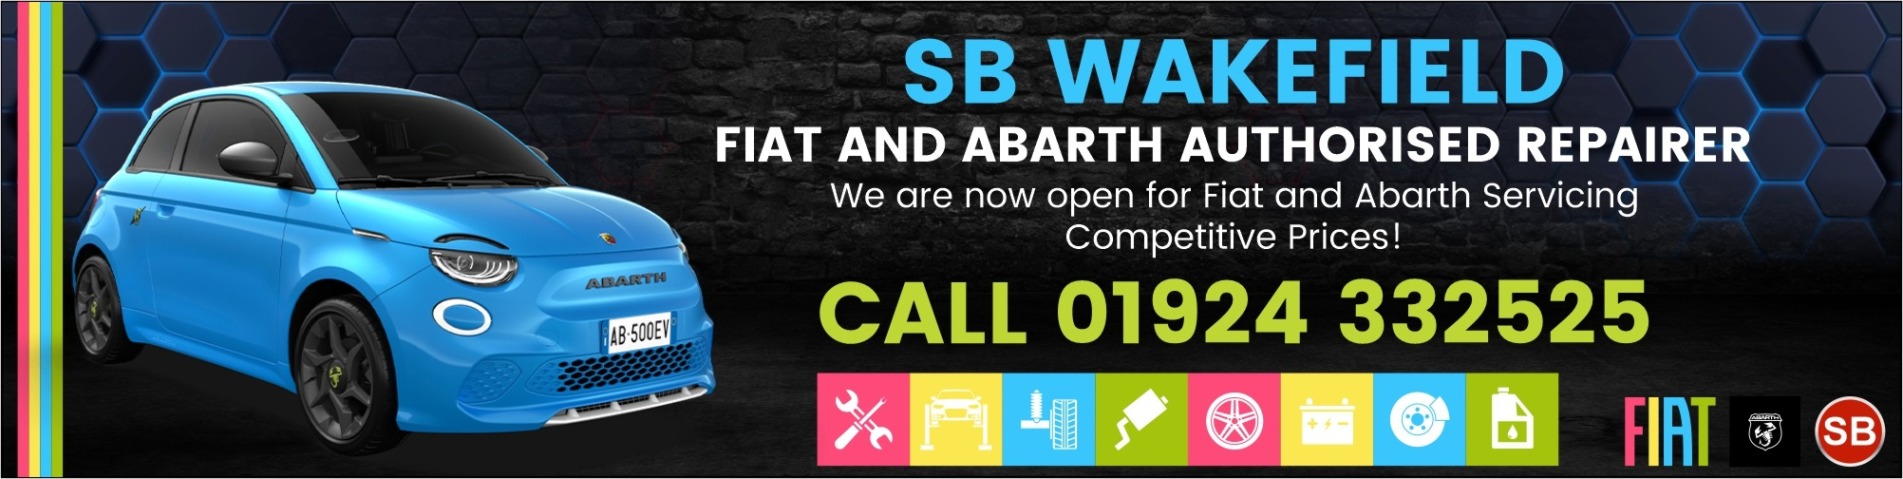 Now open for Fiat/Abarth Service